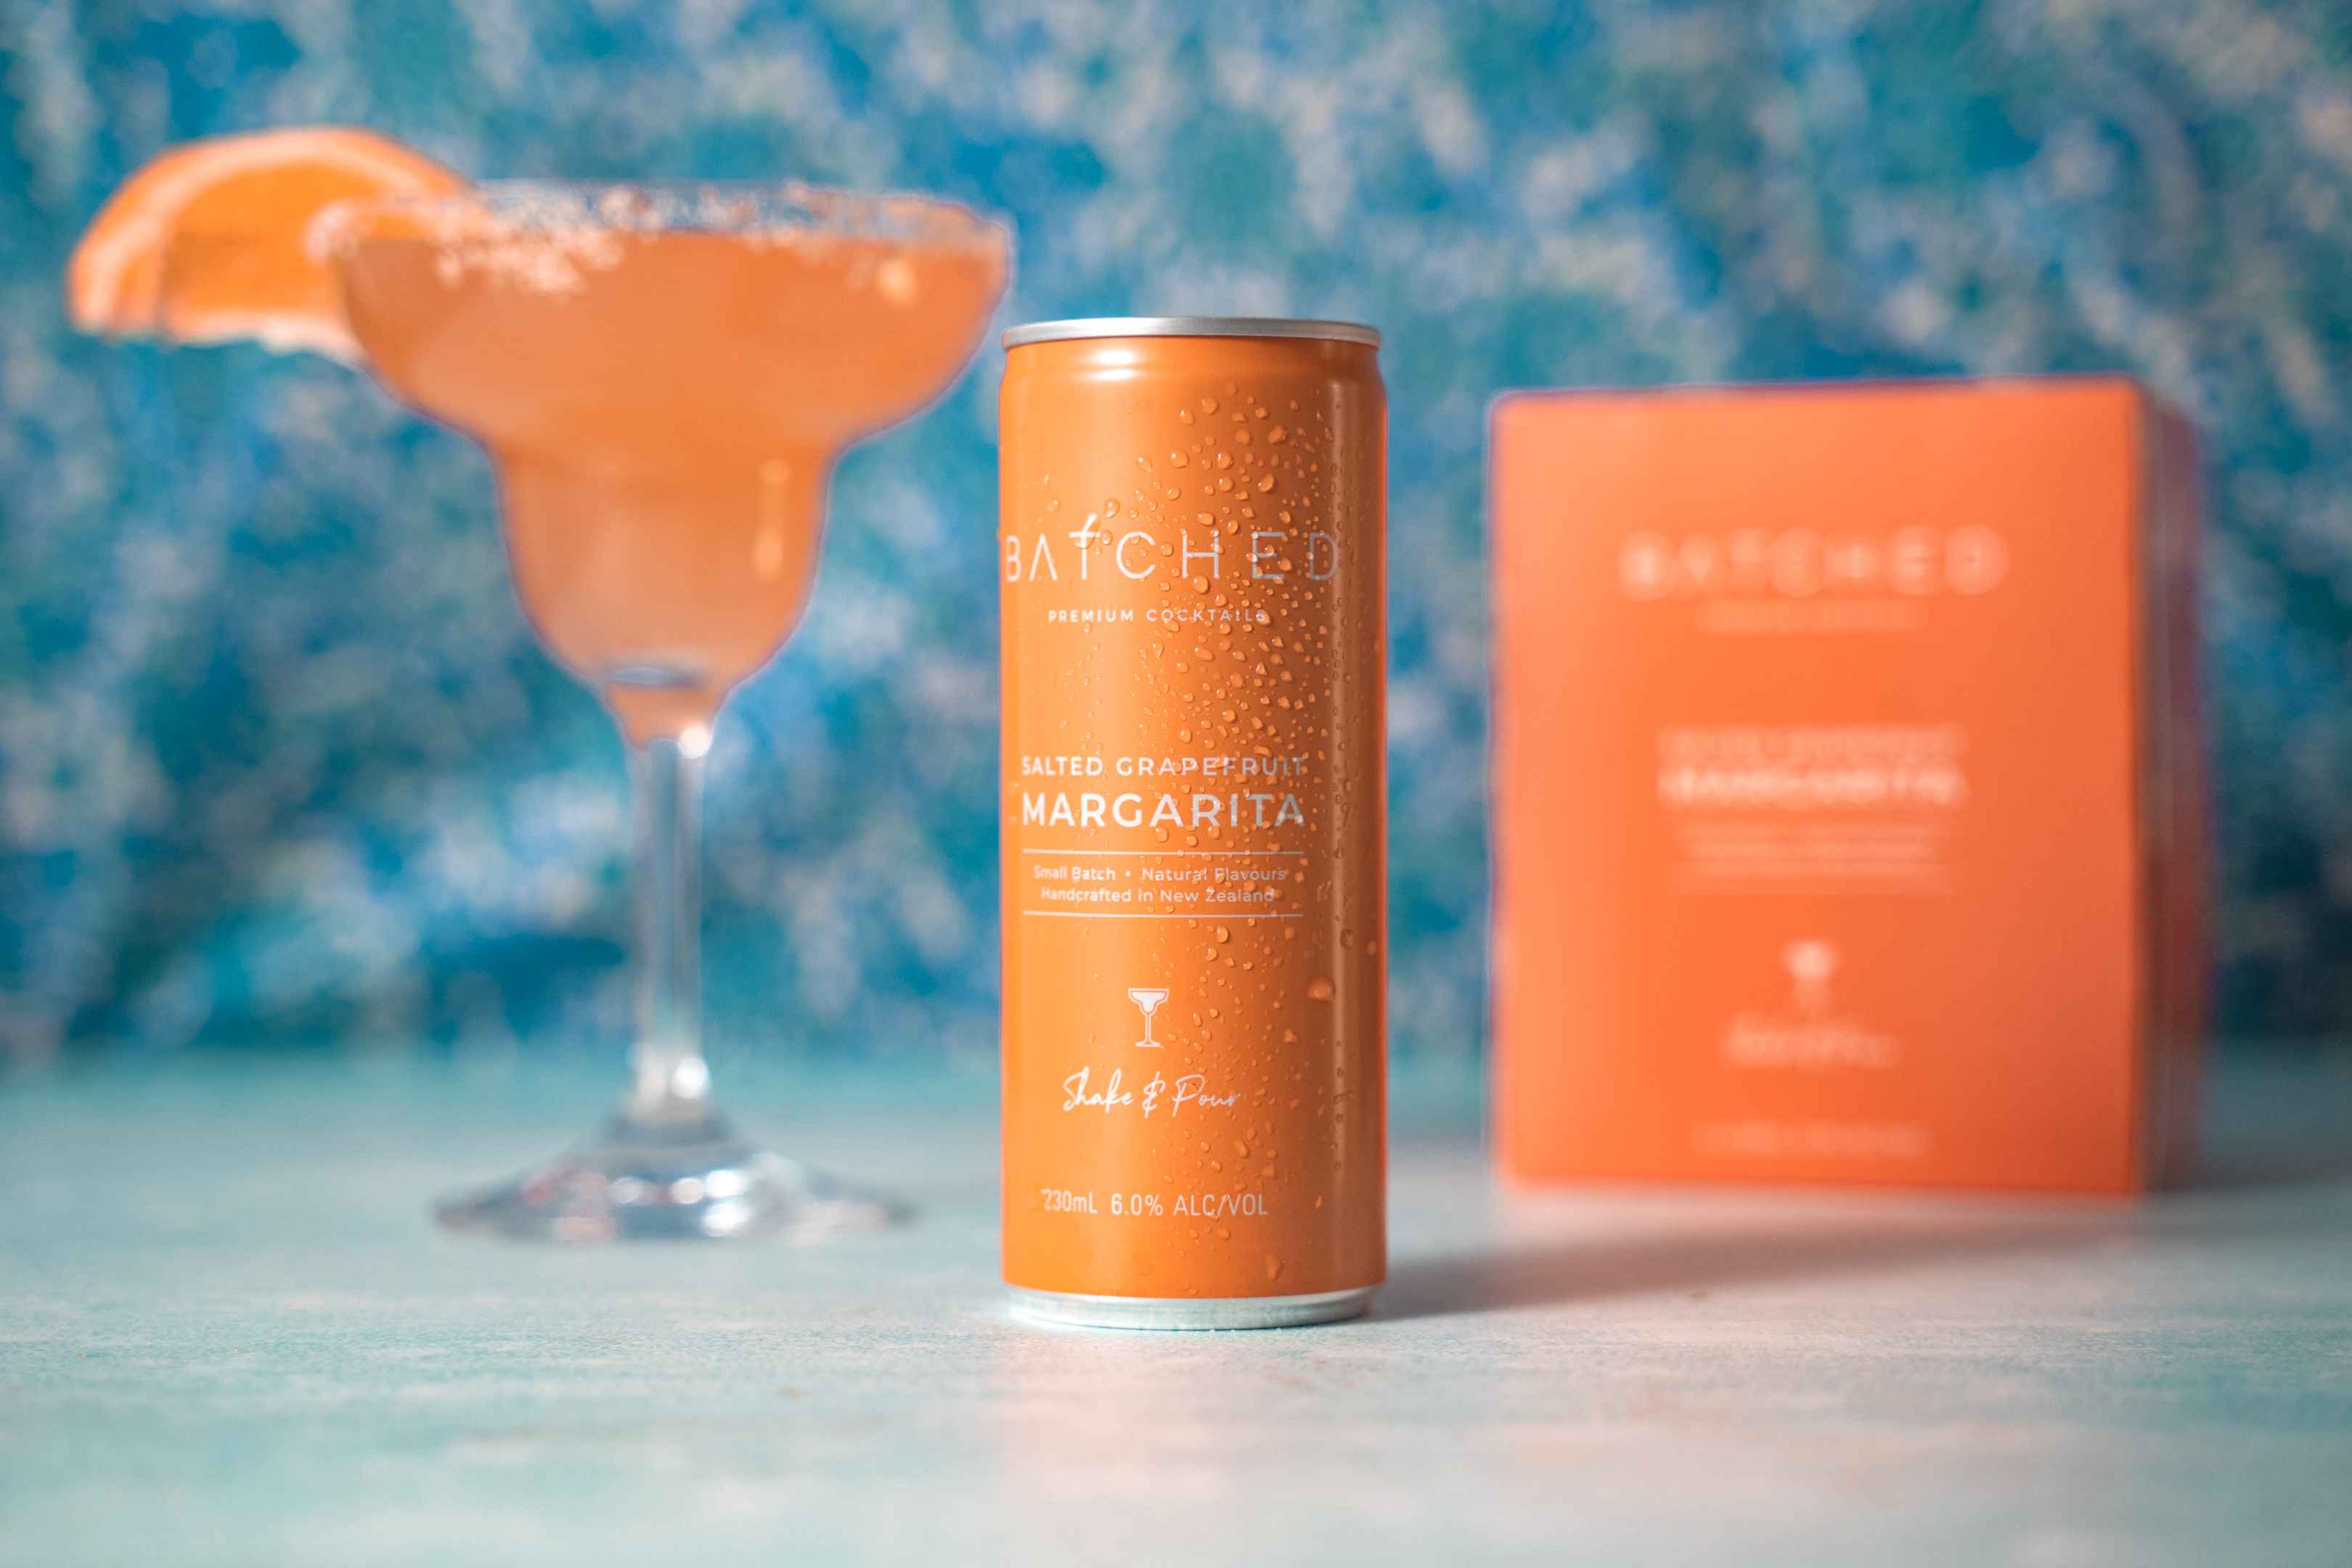 Batched Salted Grapefruit Margarita can on table with box and martini glass in background